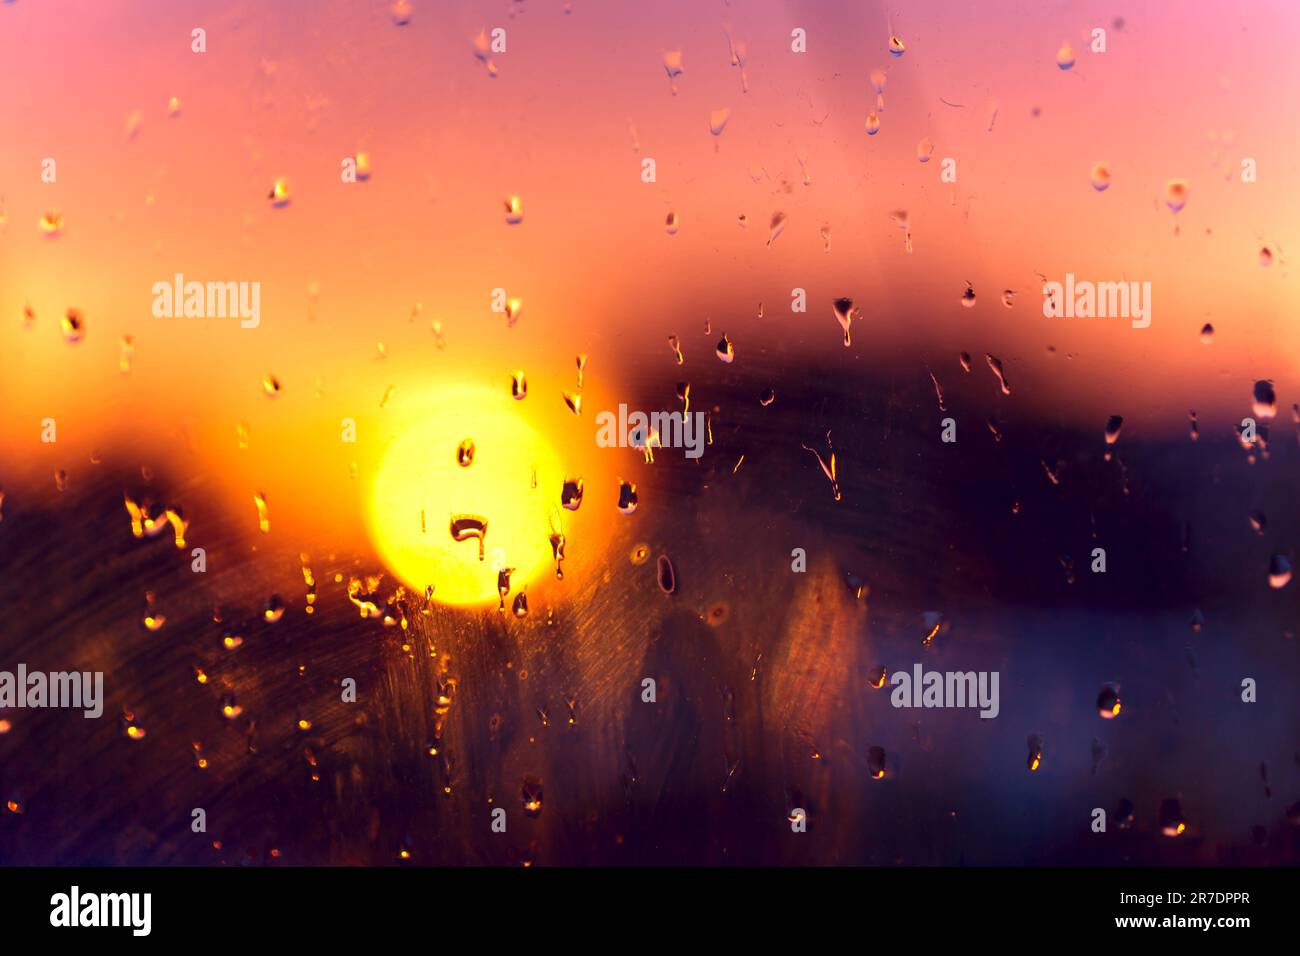 Blurred background of water droplets on a dirty glass window at sunset. Look out the dirty window. Close up wet and dirty glass texture. Stock Photo